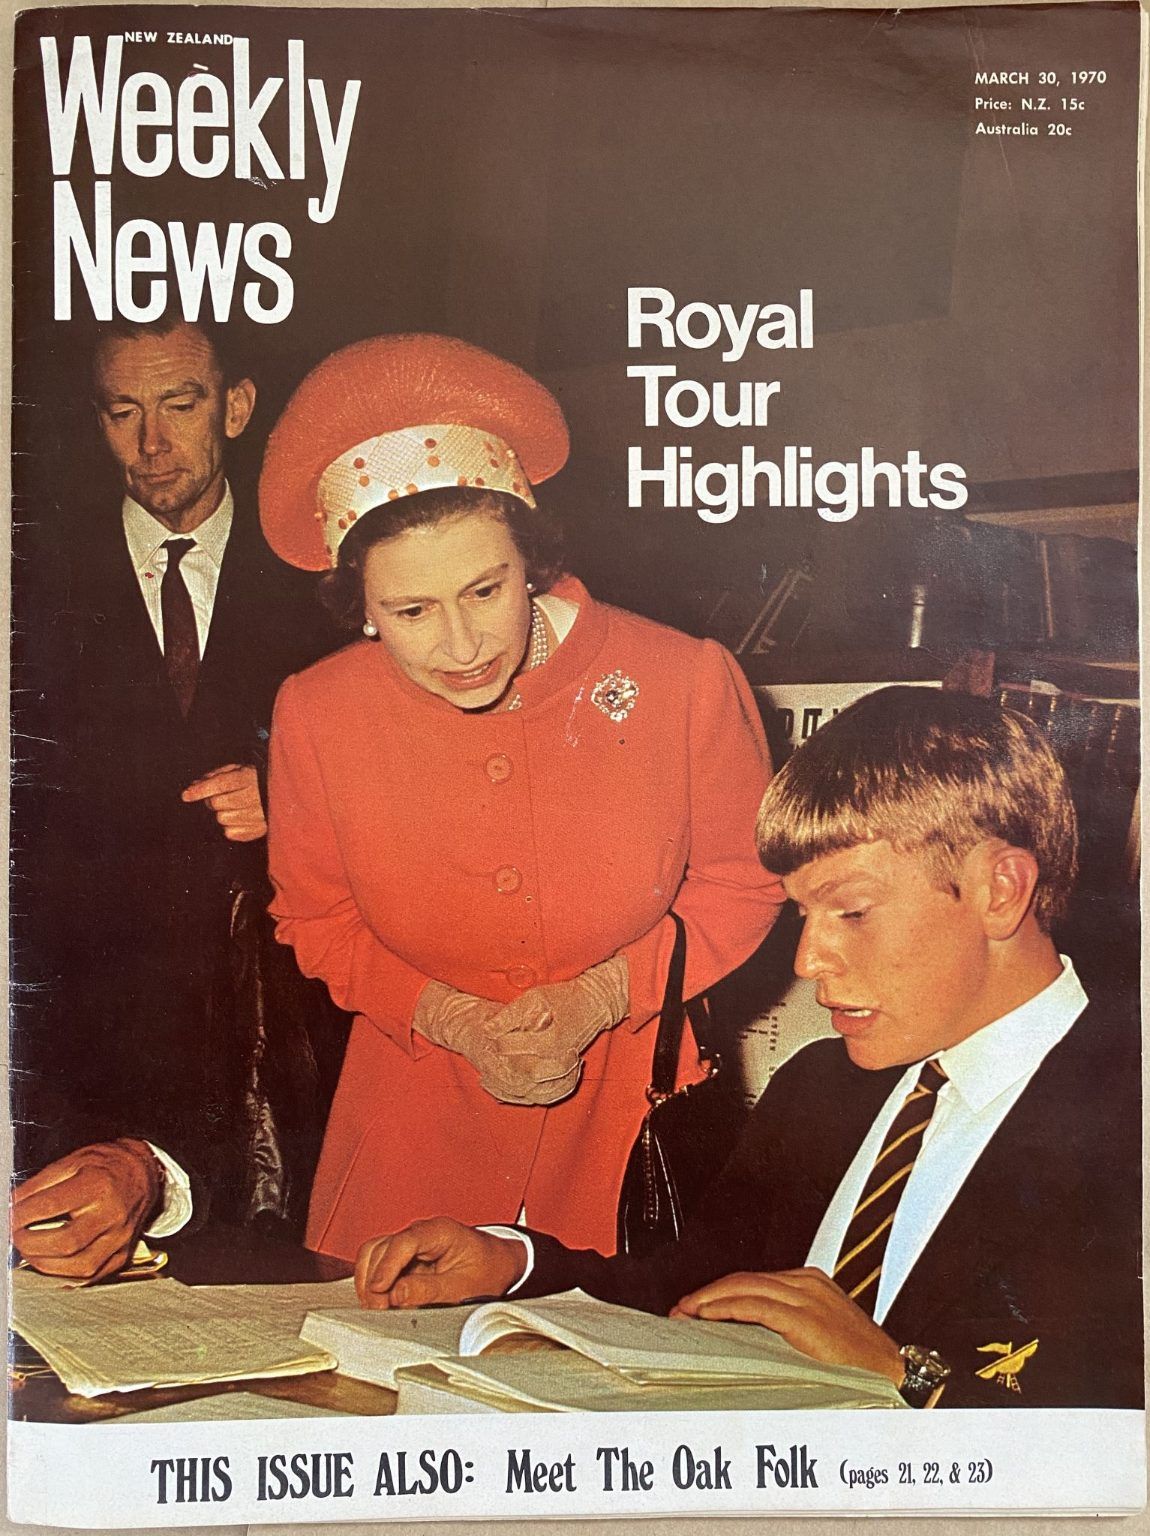 OLD NEWSPAPER: New Zealand Weekly News, No. 5547, 30 March 1970